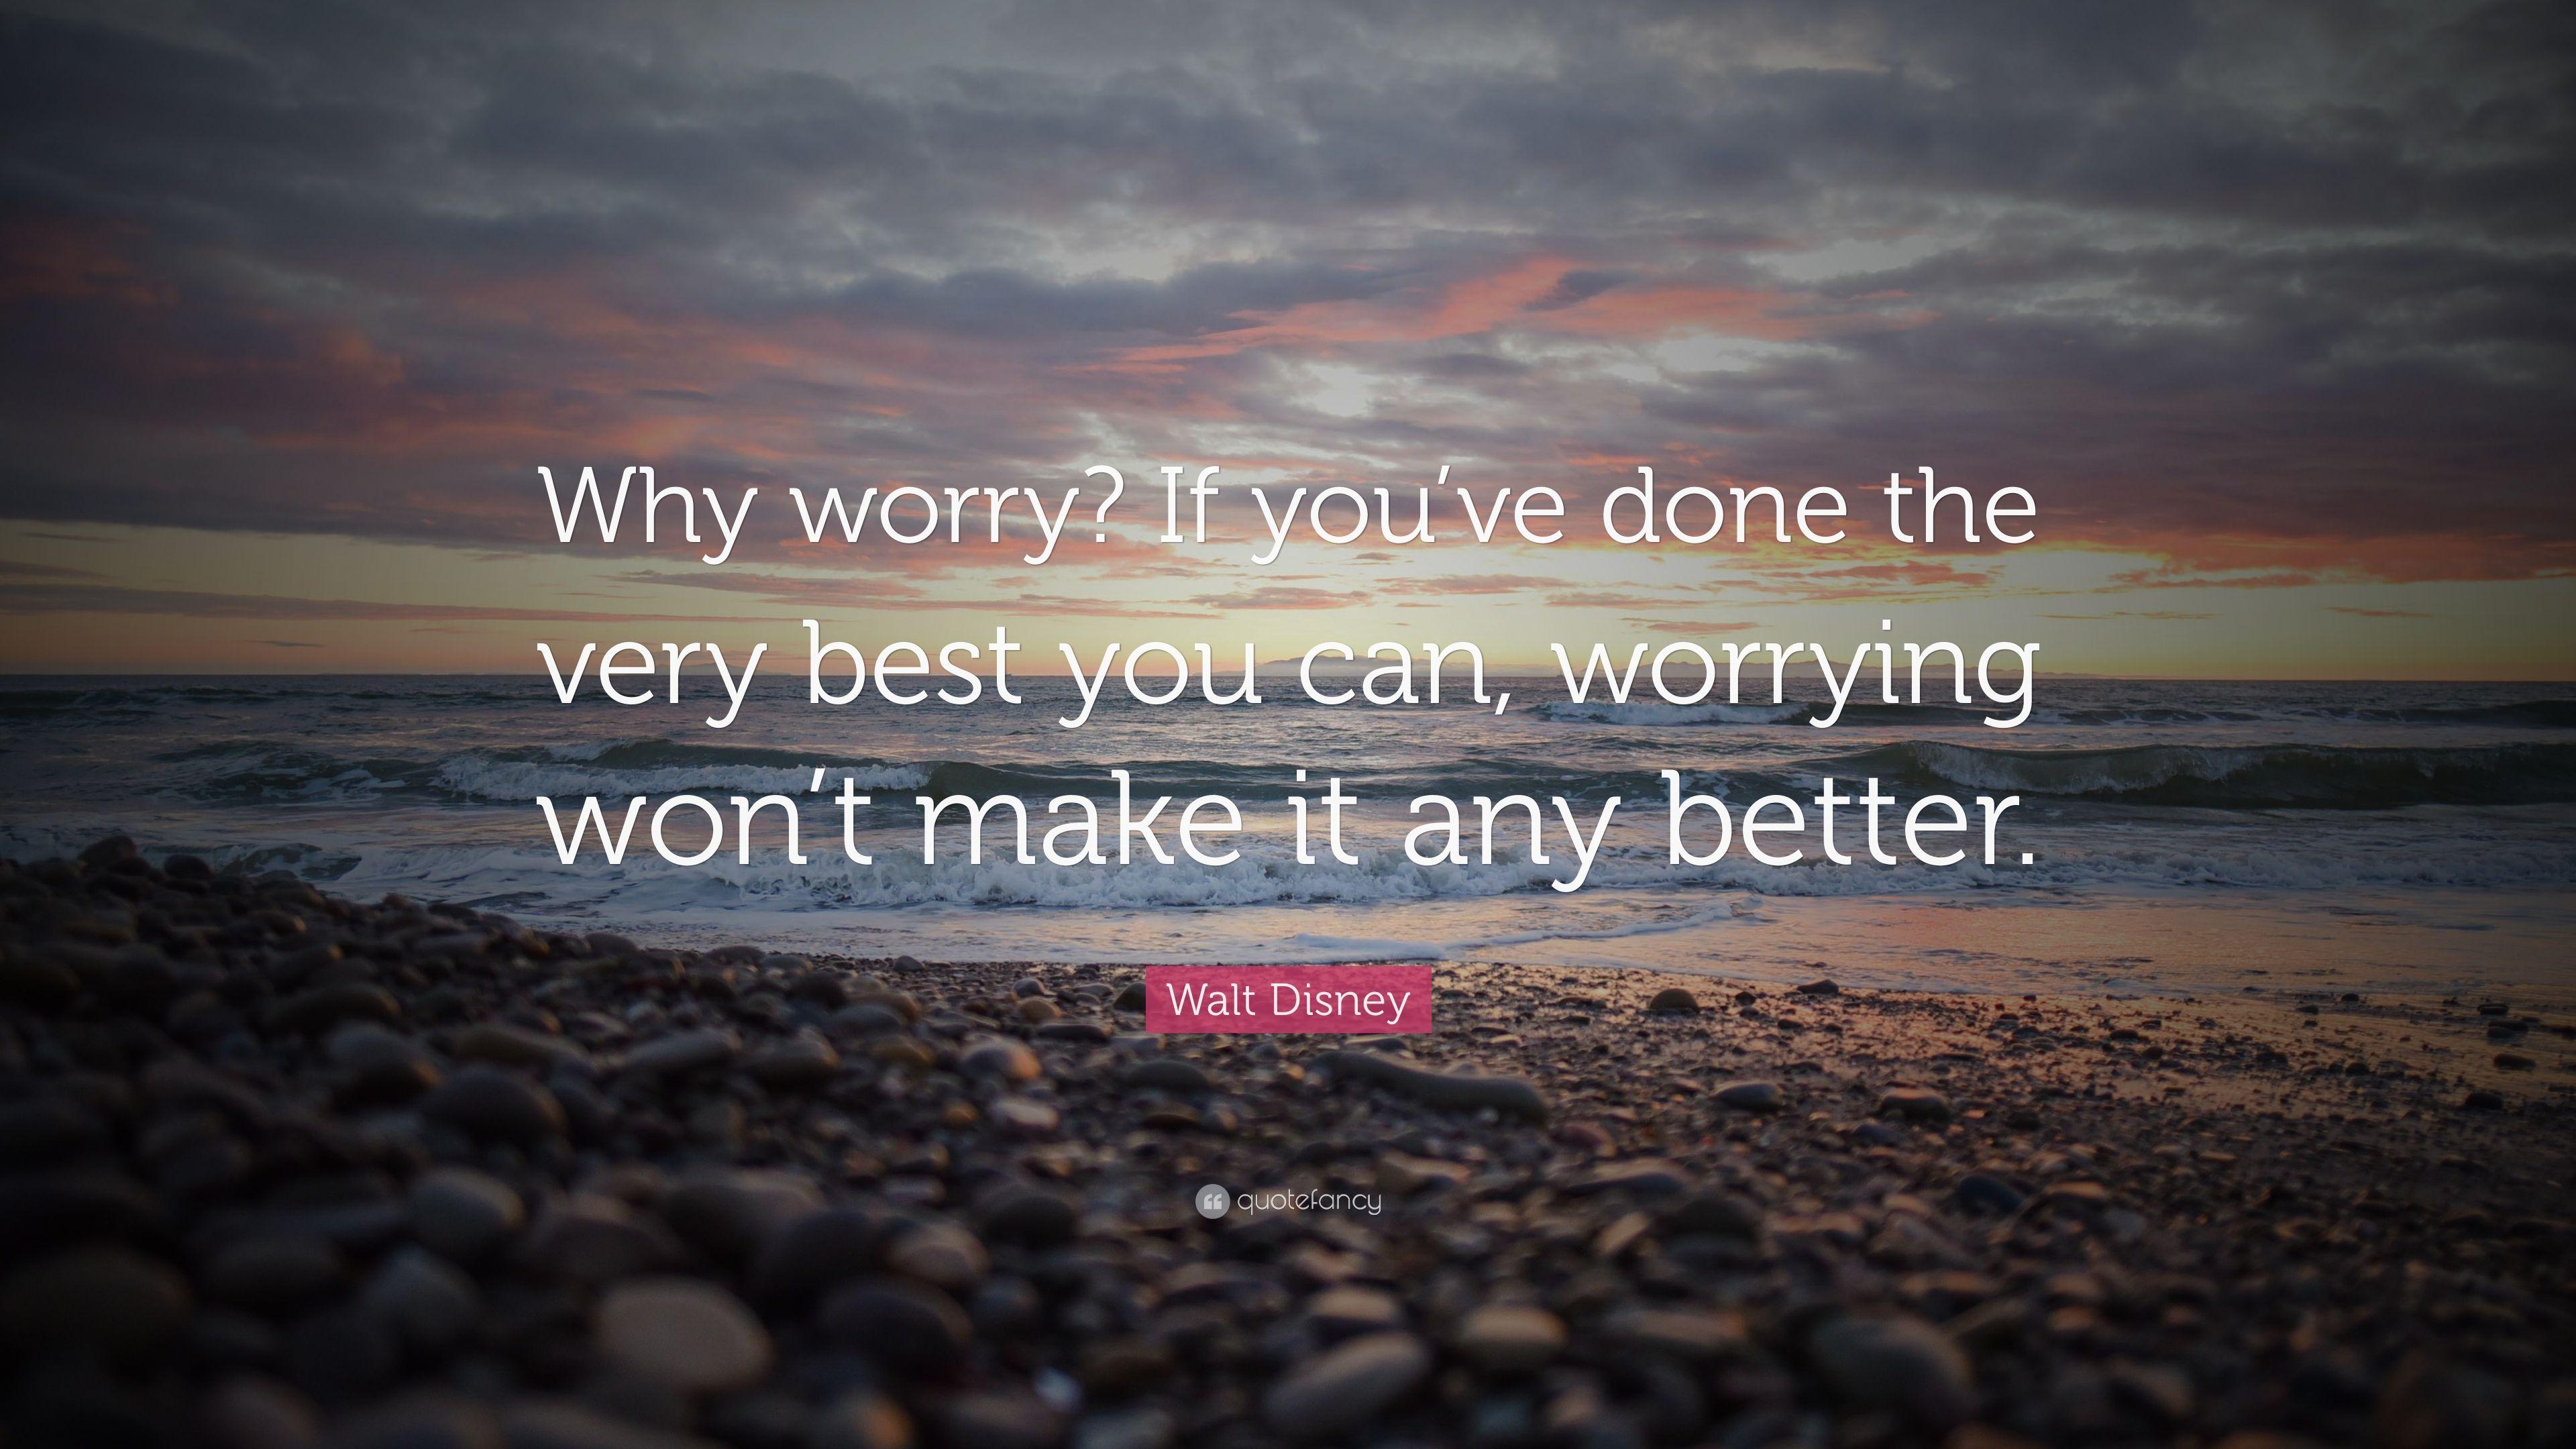 Walt Disney Quote: “Why worry? If you've done the very best you can